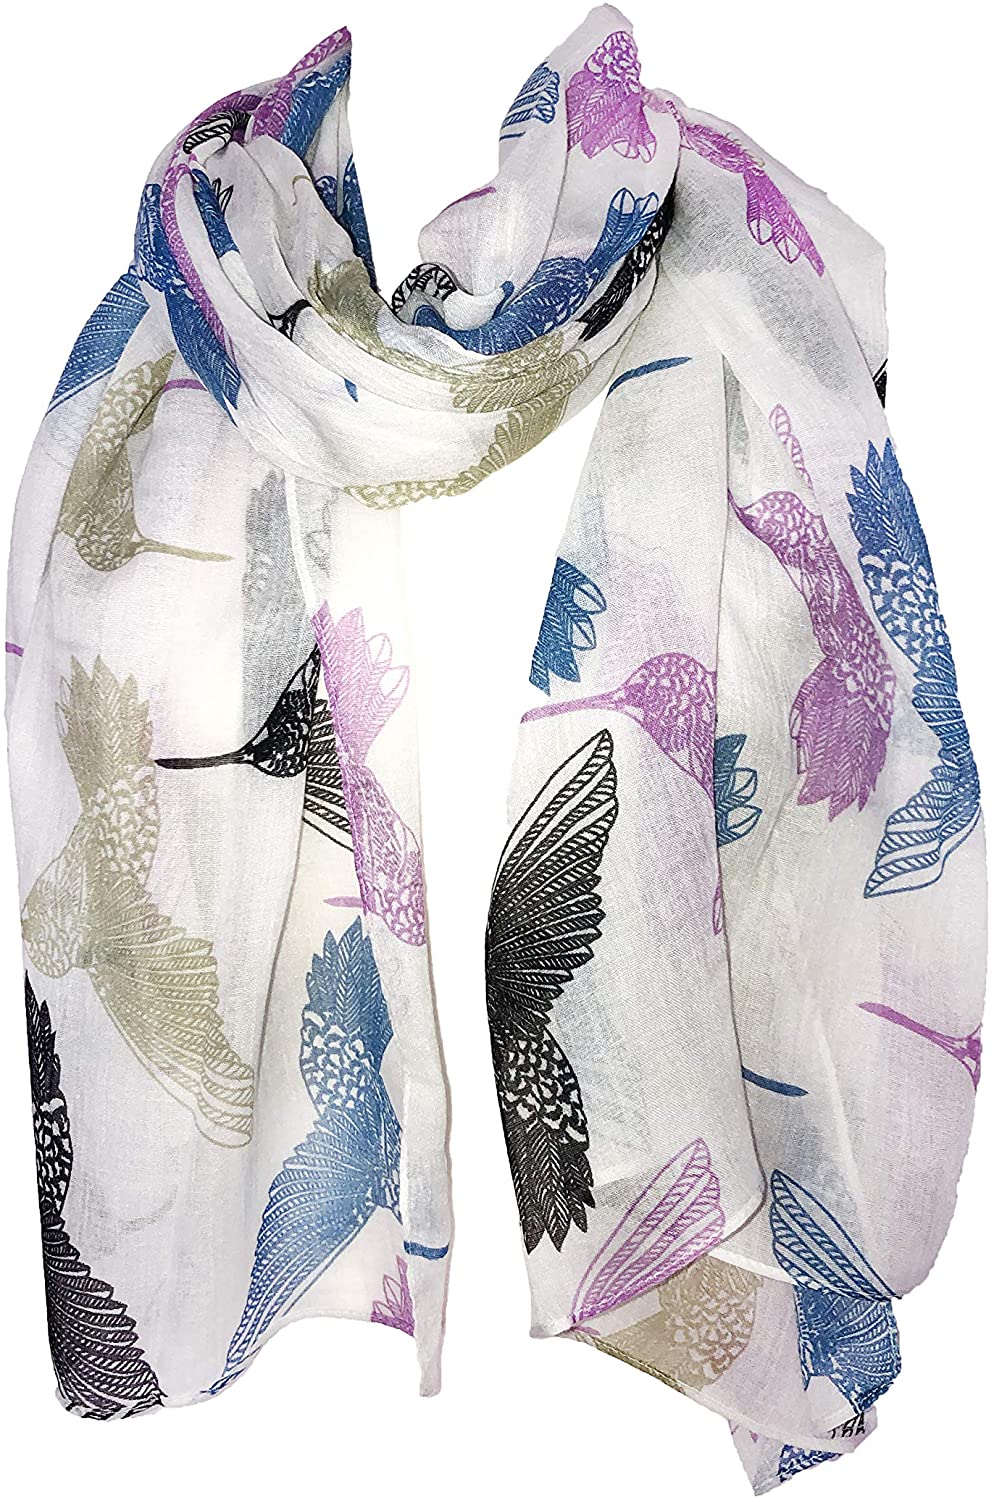 Pamper Yourself Now Creamy White Hummingbird Scarf Lovely Soft Scarf